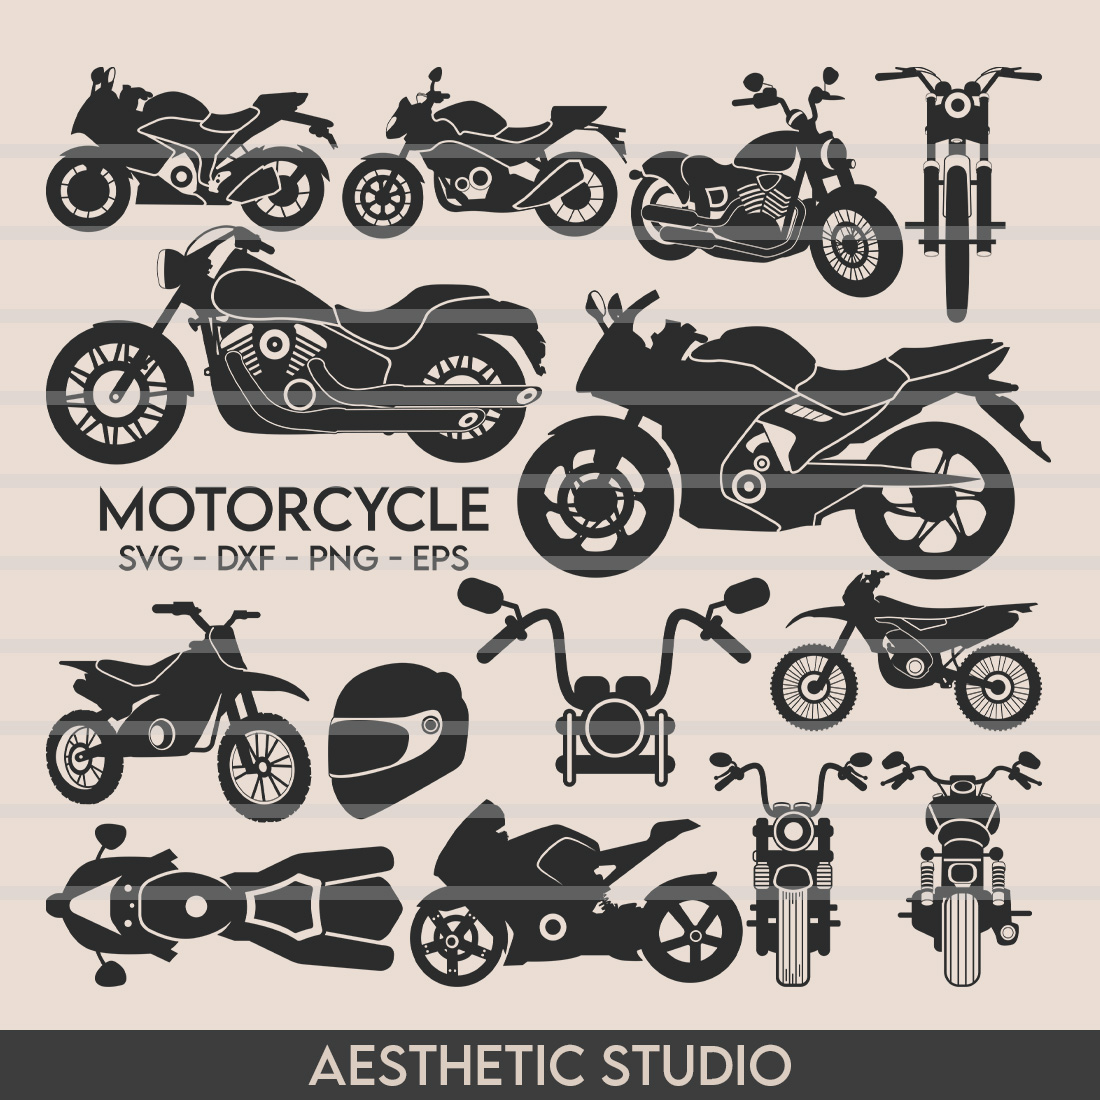 Motorcycle SVG, Motorcycle, Motor Bike Svg, Motorcycle Files For Cricut, Bike Svg, Motor cycle Svg, Clipart, Instant Download, Dxf, Png, Eps cover image.